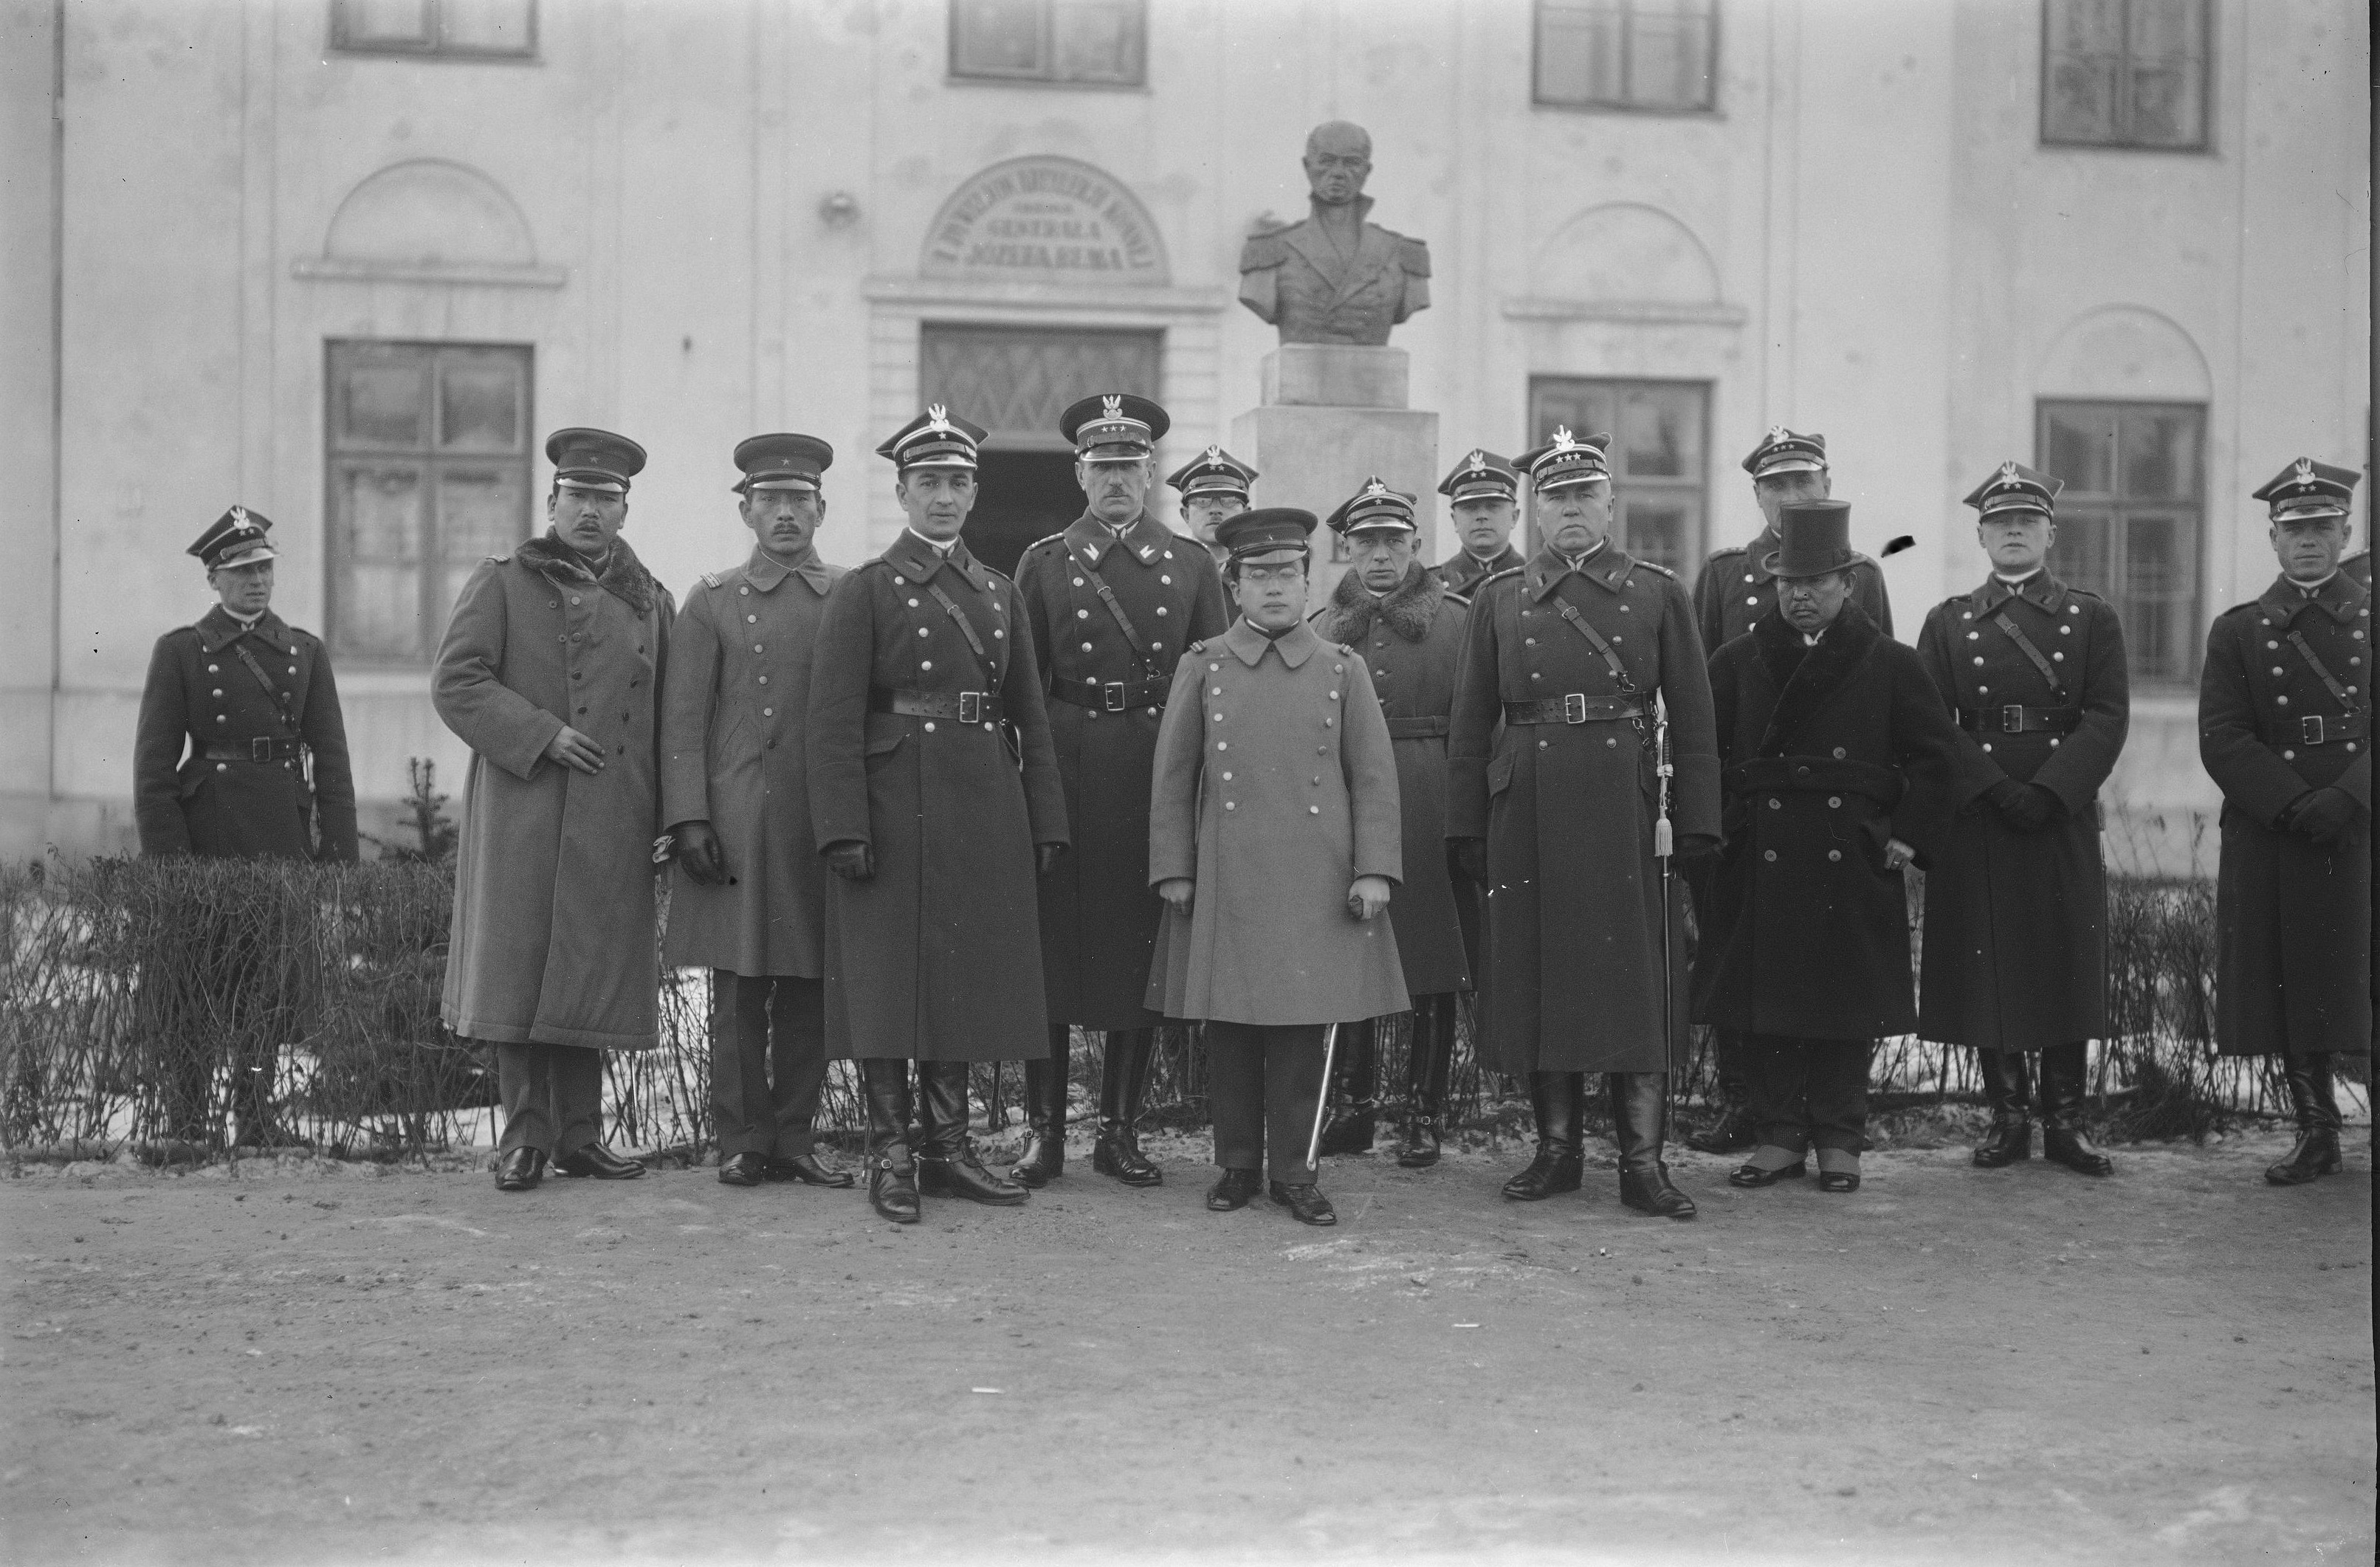 Crown Prince Yi Un at the 1st Horse Artillery Squadron barracks in Warsaw, Poland, 29 Nov 1927, photo 1 of 2